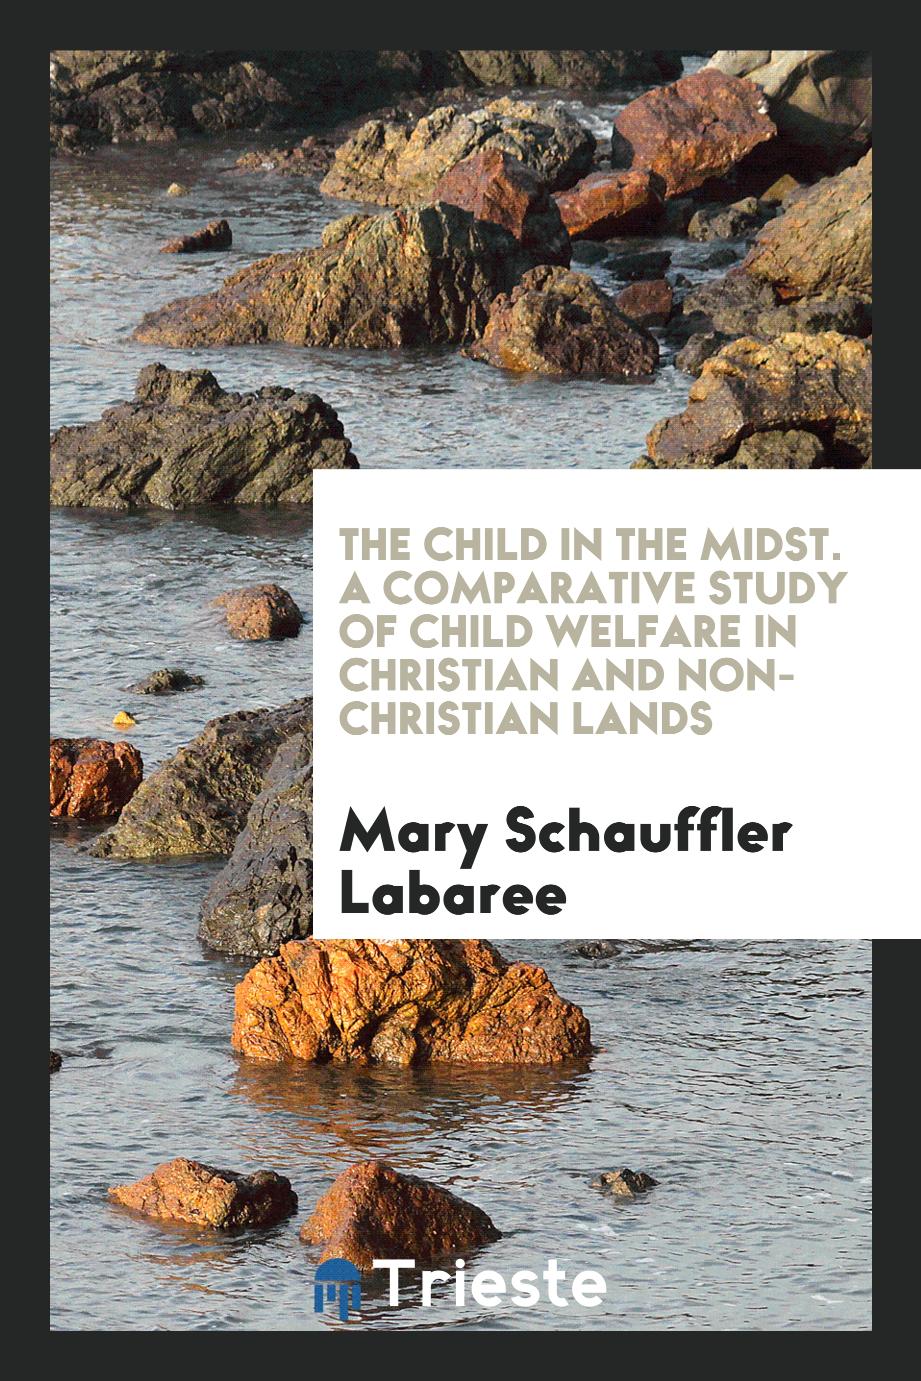 The Child in the Midst. A Comparative Study of Child Welfare in Christian and Non-Christian Lands